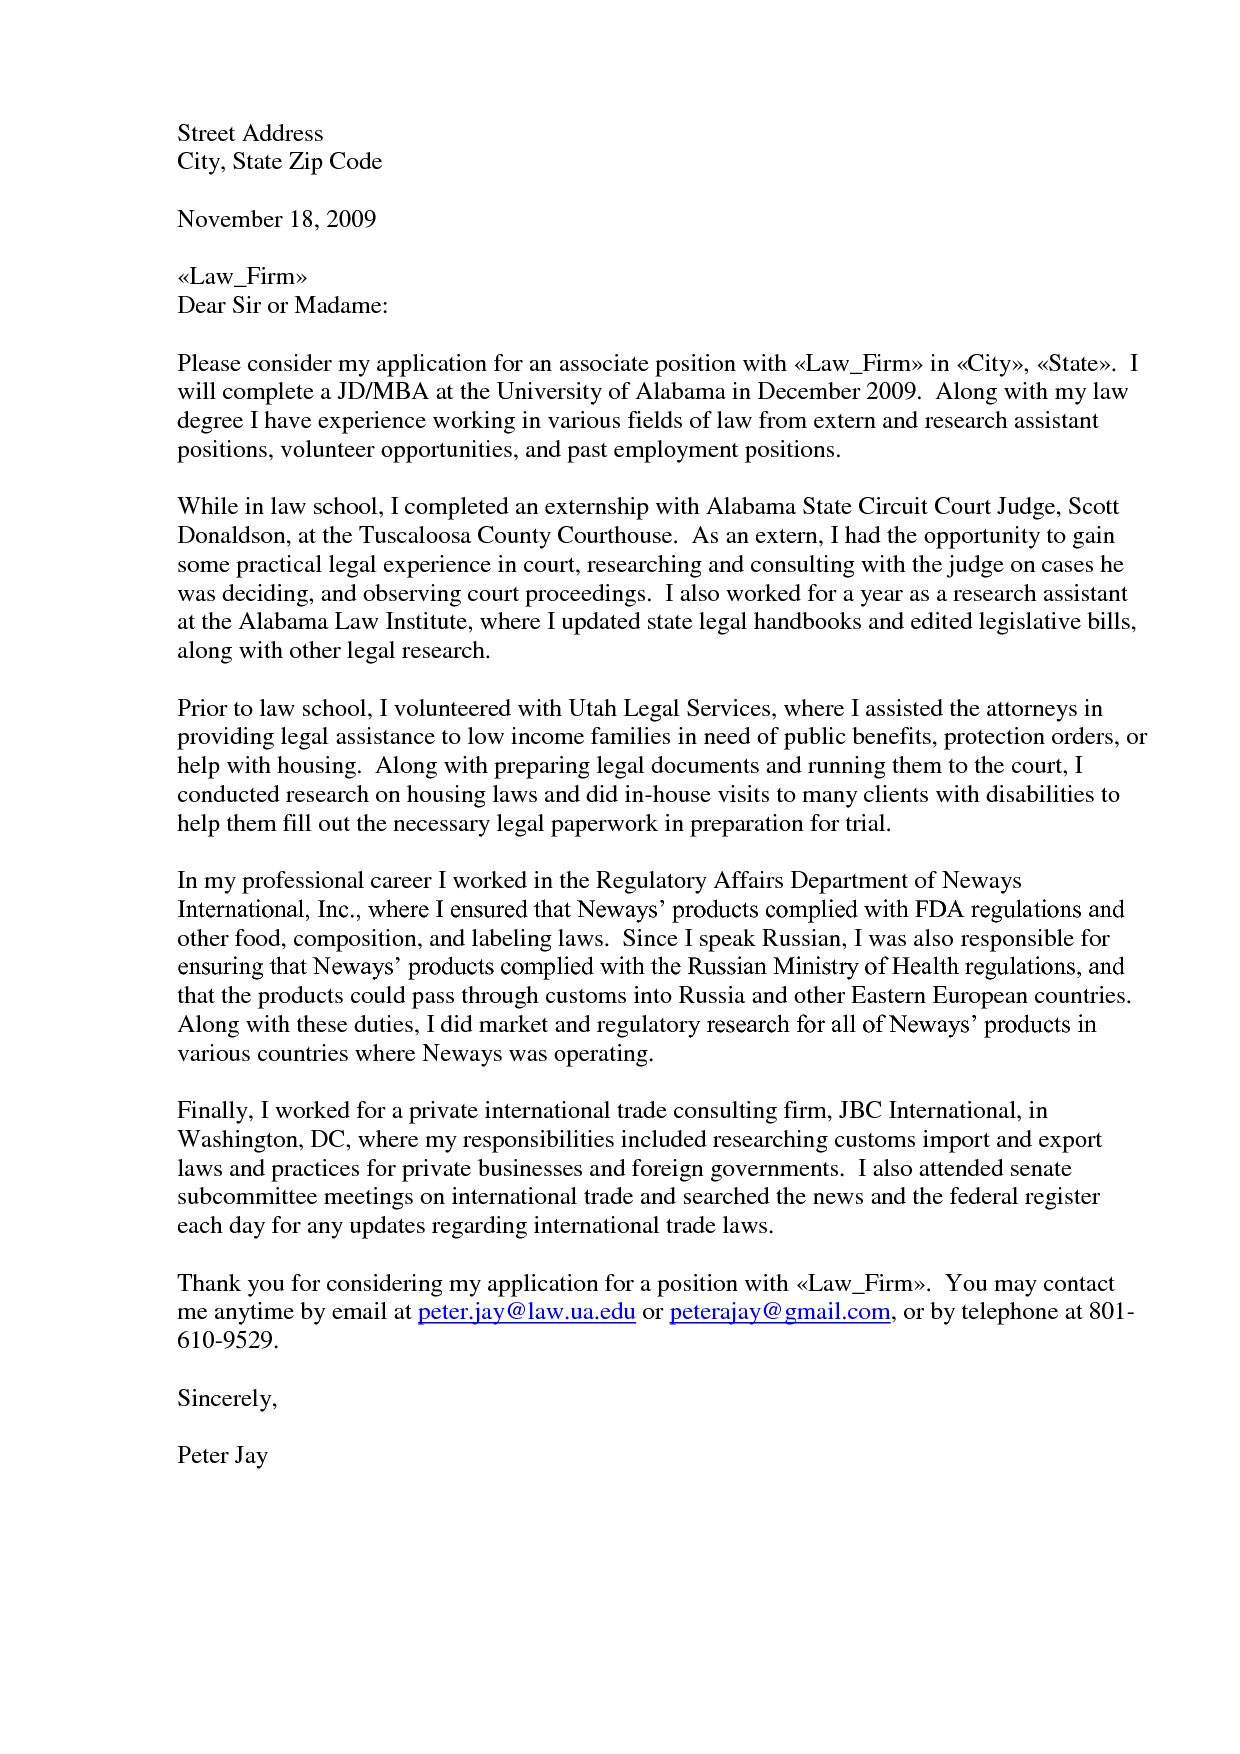 student cover letter for law firm internship